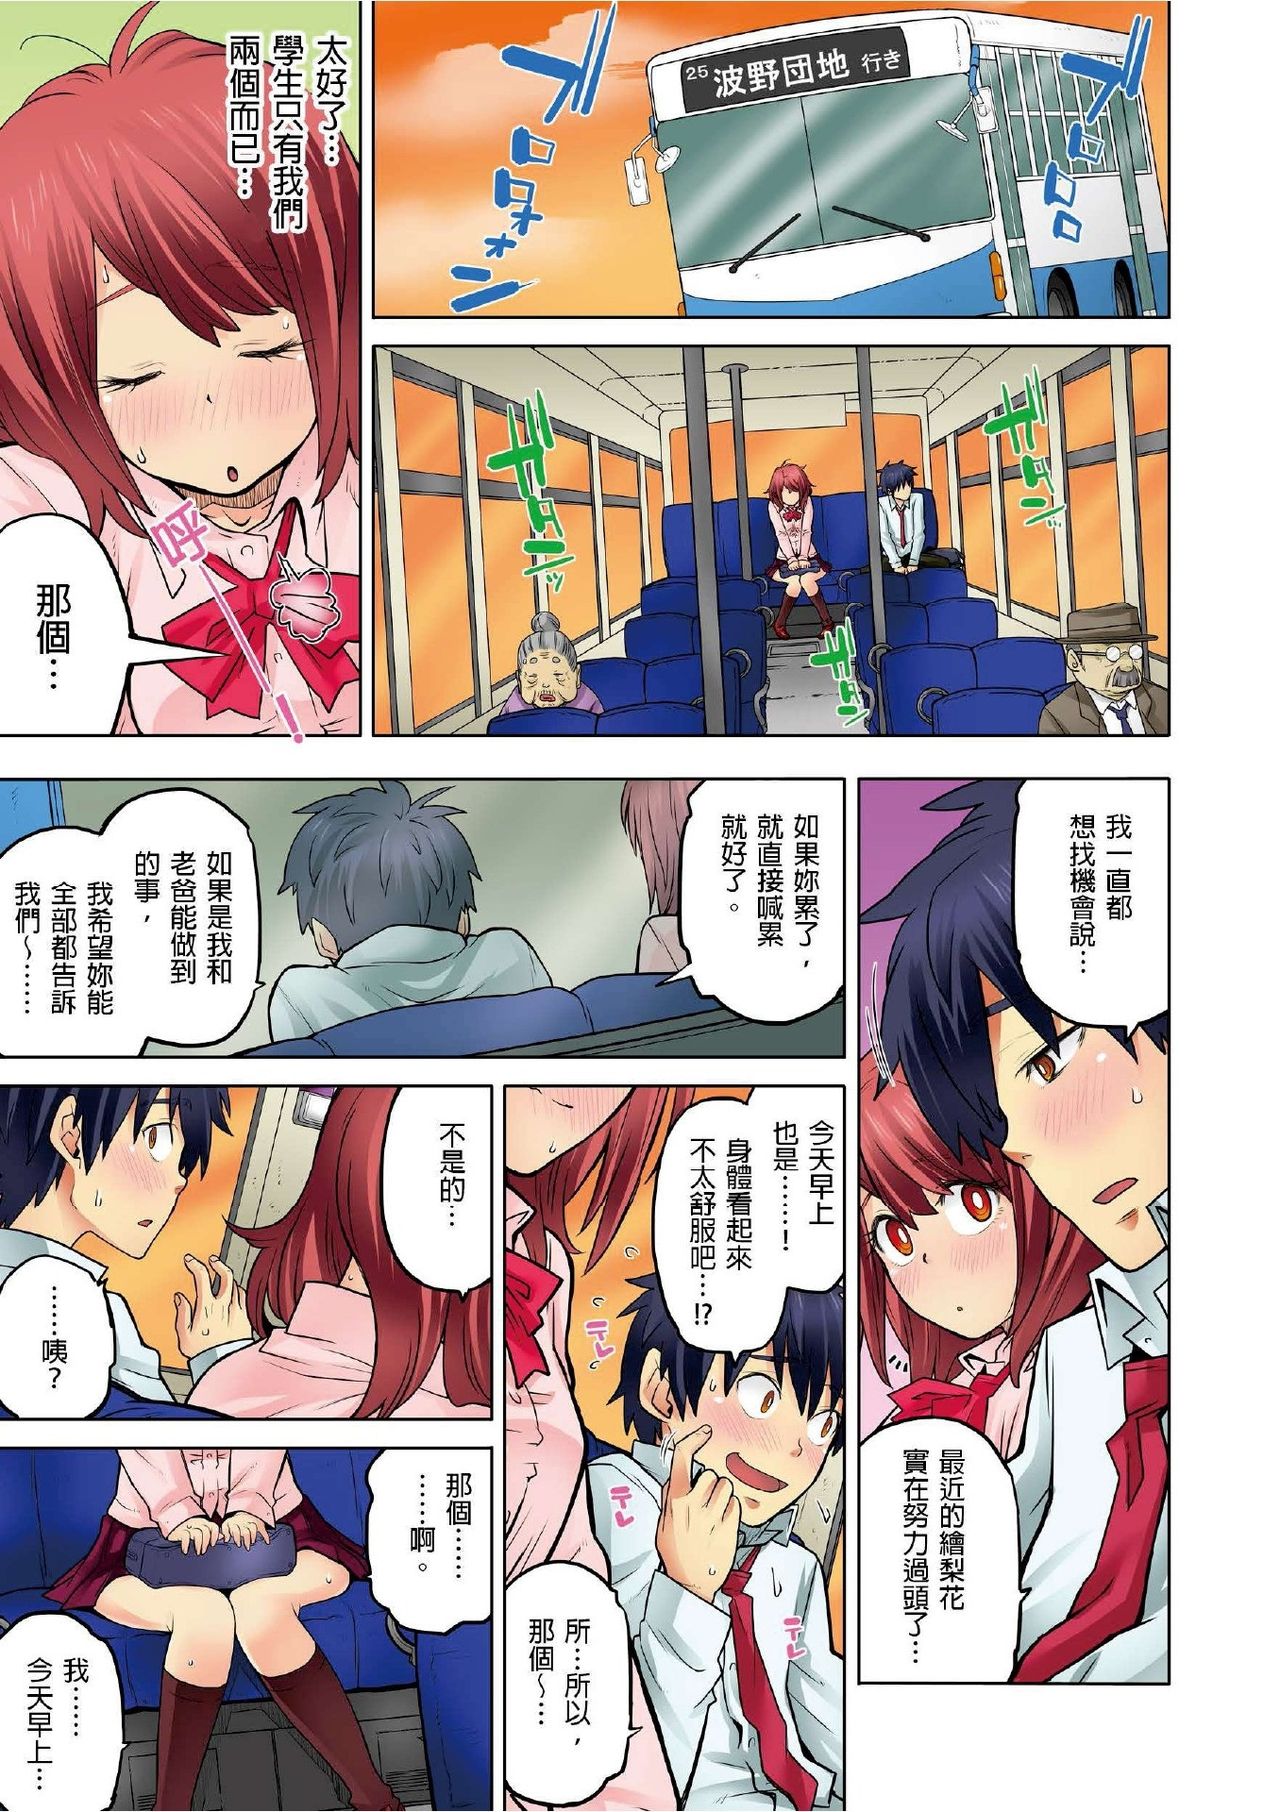 [Hisashi Ryuuto] My Classmate is My Dad's Bride, But in Bed She's Mine. [Chinese] [Ch.1-15] (Ongoing) [りゅうとひさし] 同級生は親父の嫁。ベッドの上では俺の嫁。 [中国翻訳] [Ch.1-15] [進行中]